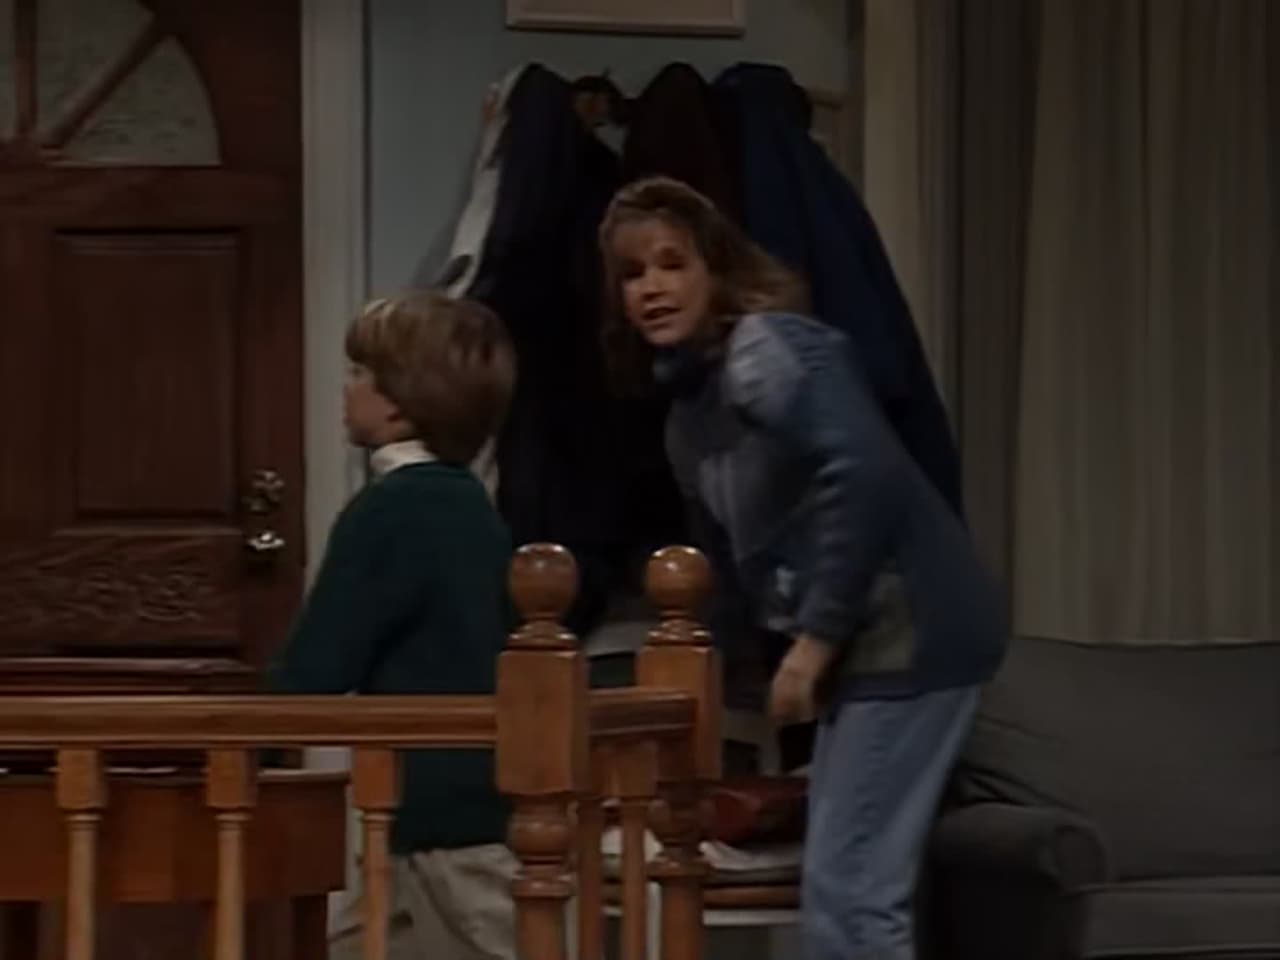 Home Improvement - Season 2 Episode 17 : You're Driving Me Crazy, You're Driving Me Nuts